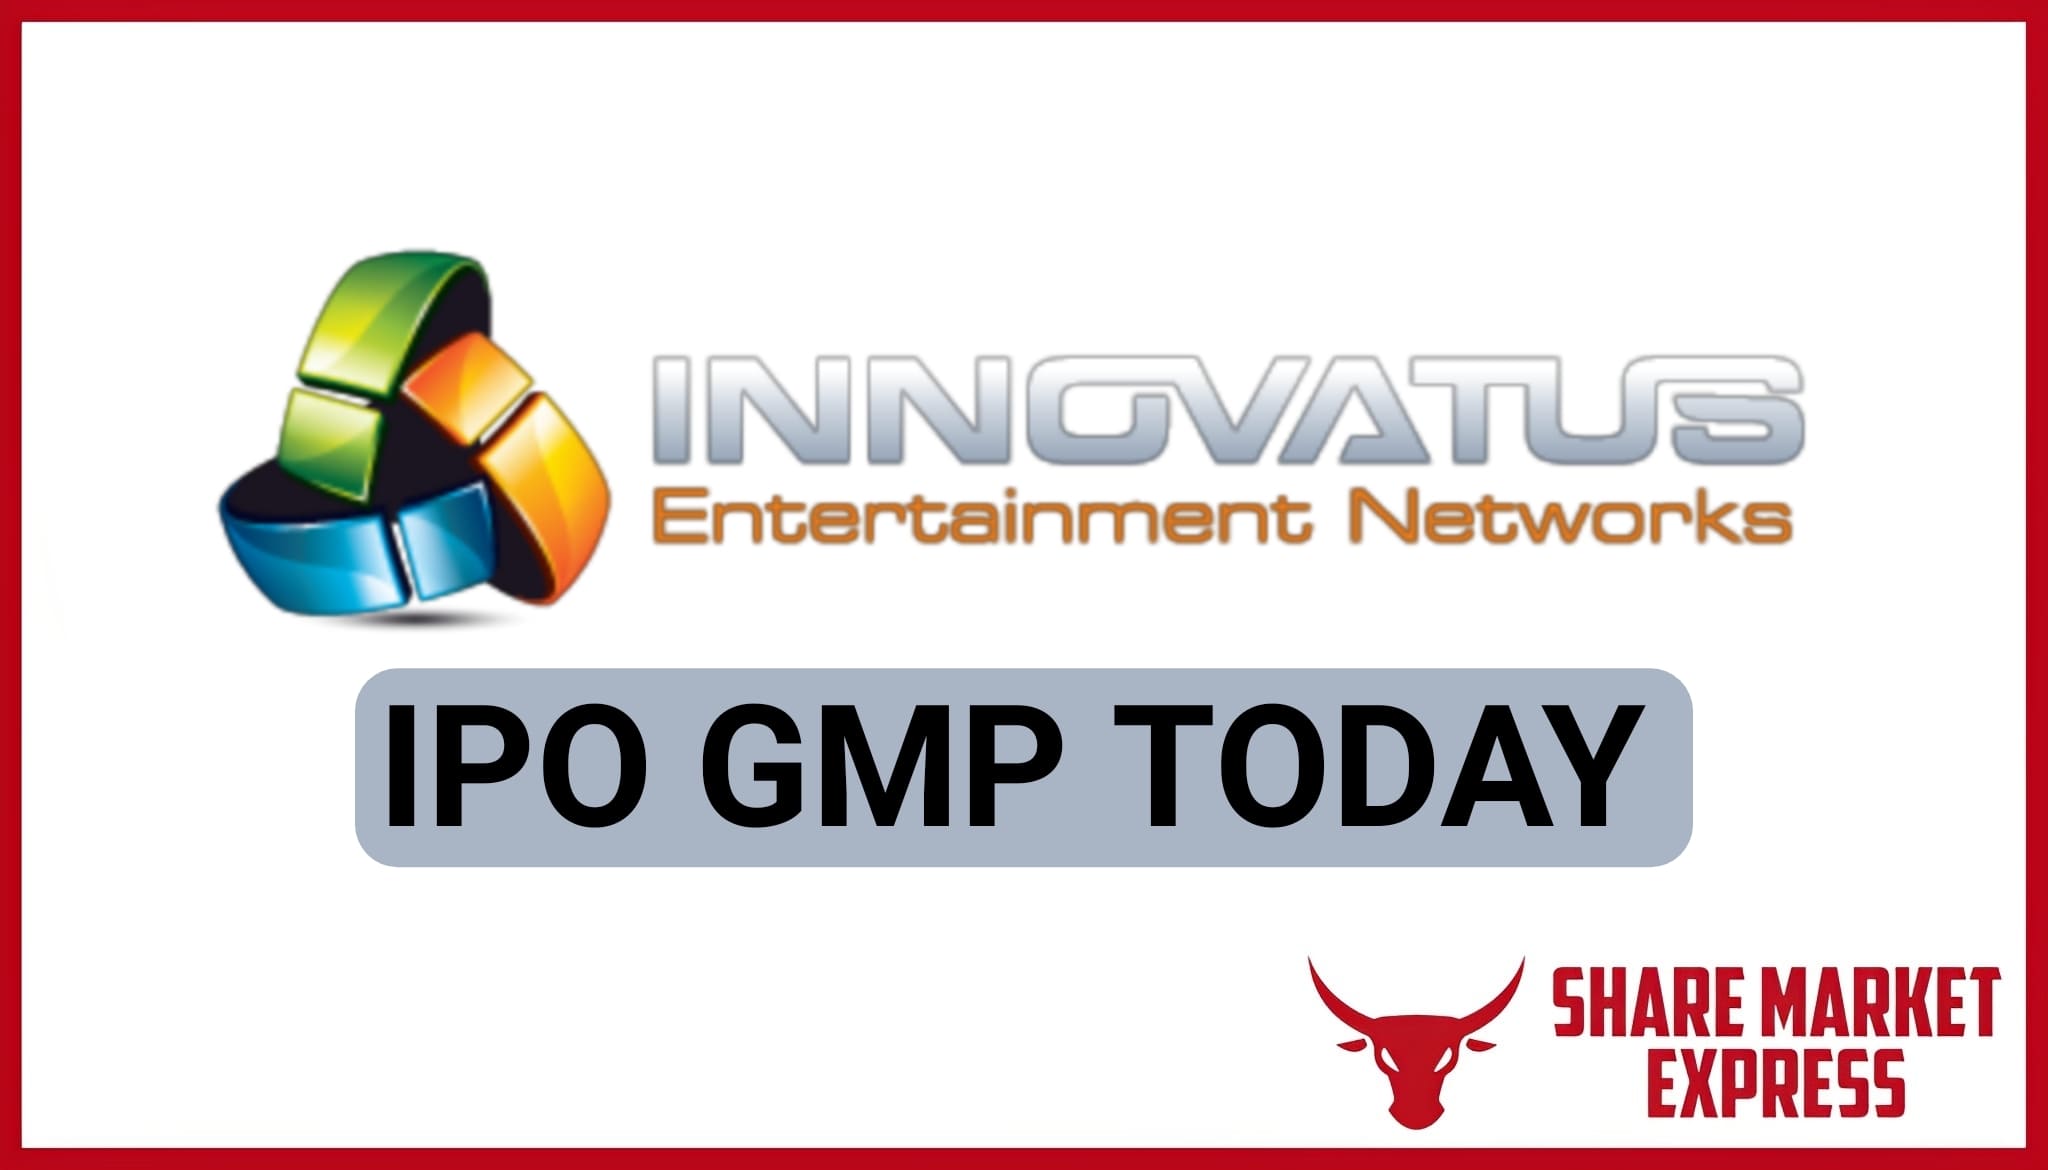 Innovatus Entertainment Networks IPO GMP Today